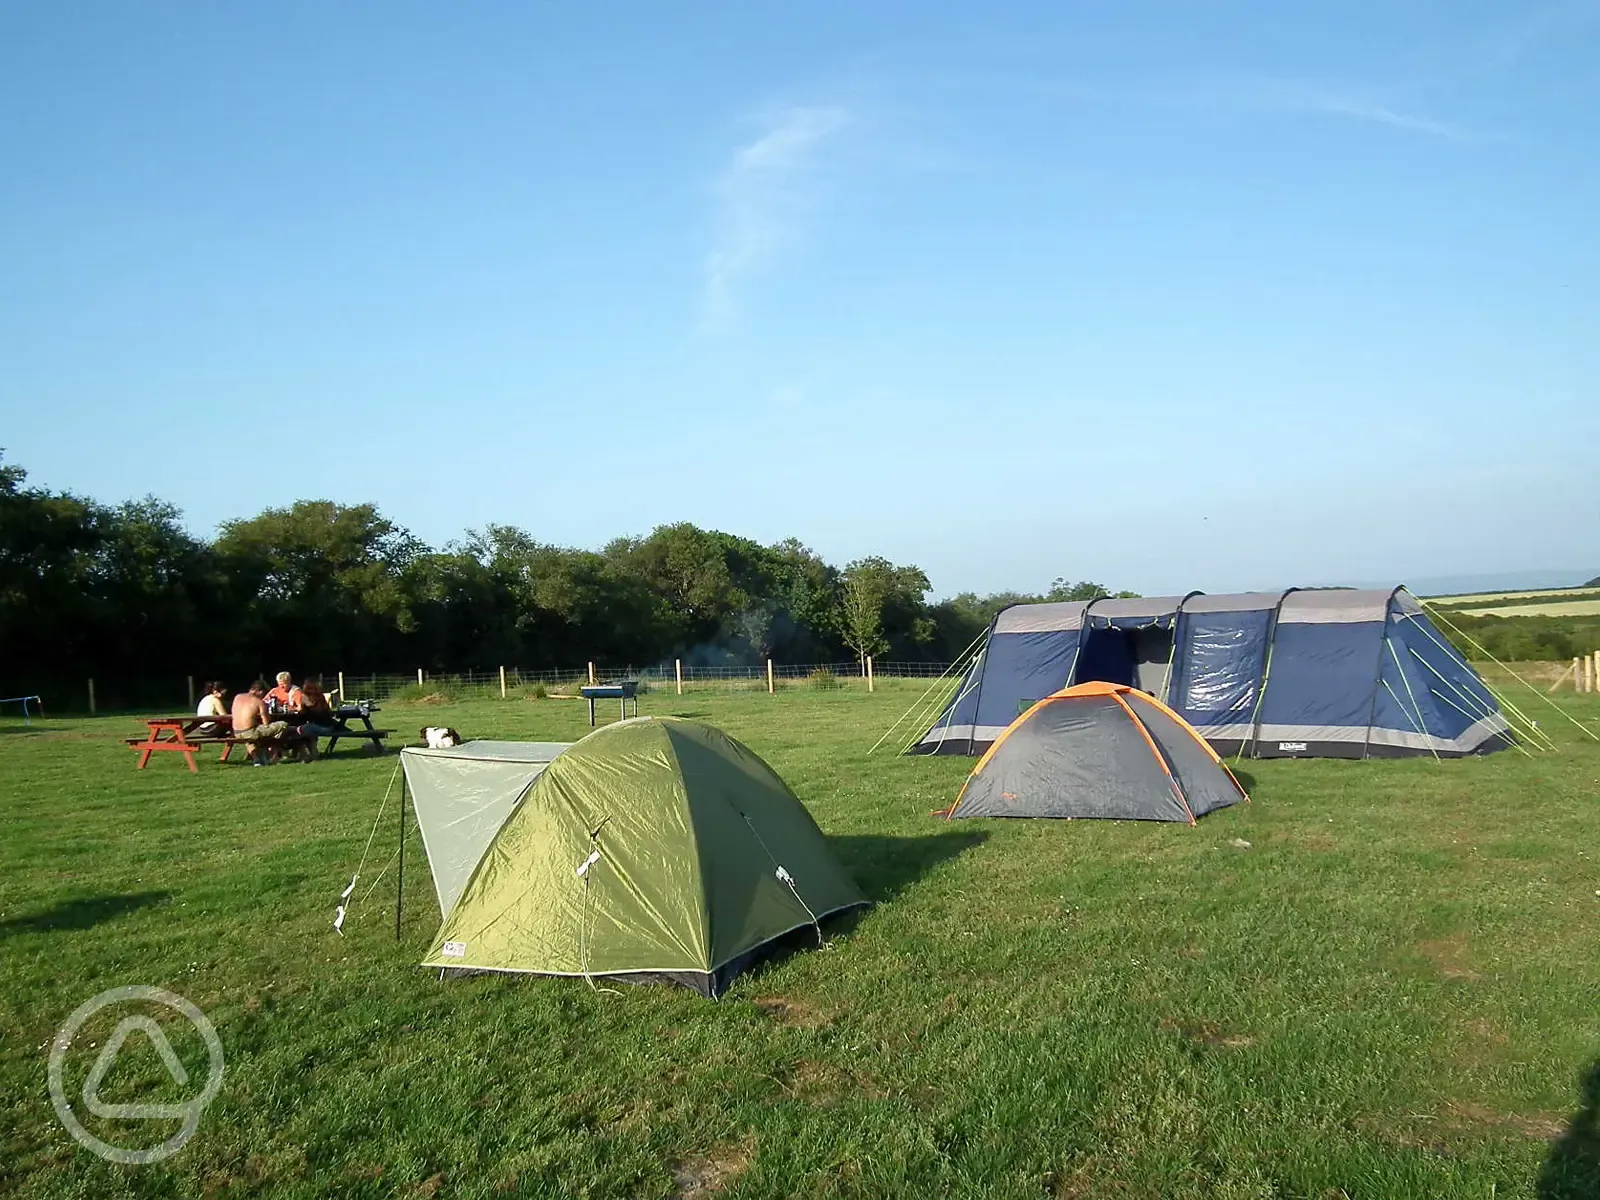 Camping pitches Chelsfield Farm Shop and Campsite